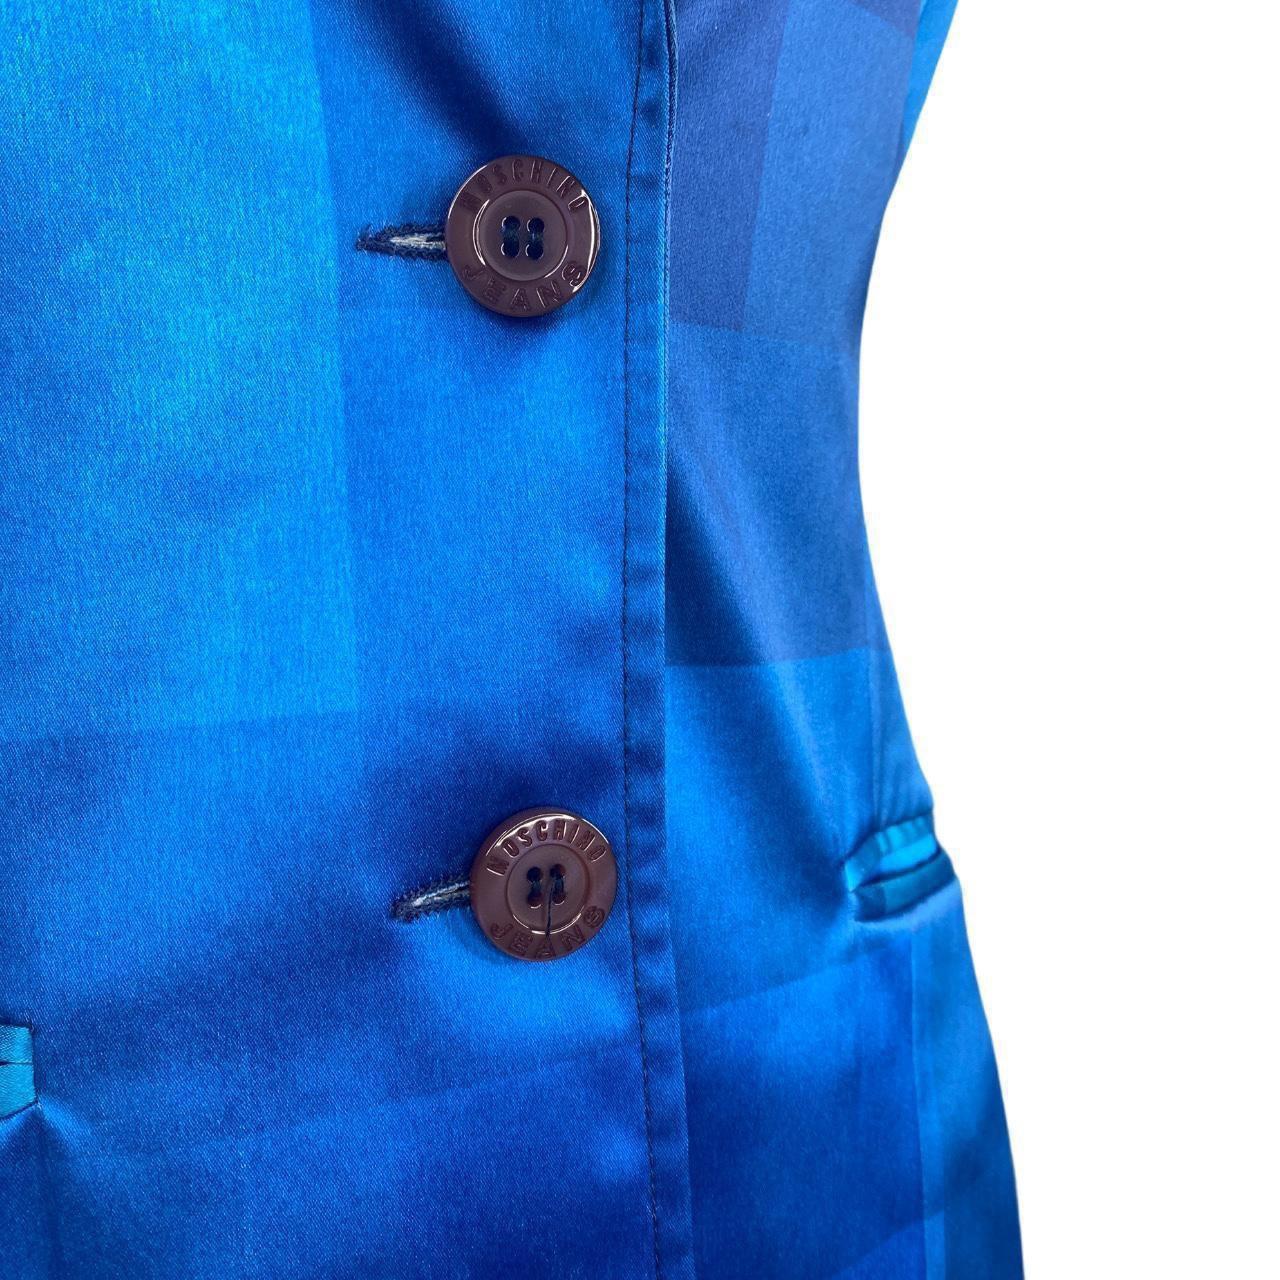 Moschino Blazer Blue Satin Square Jacket In Good Condition For Sale In London, GB